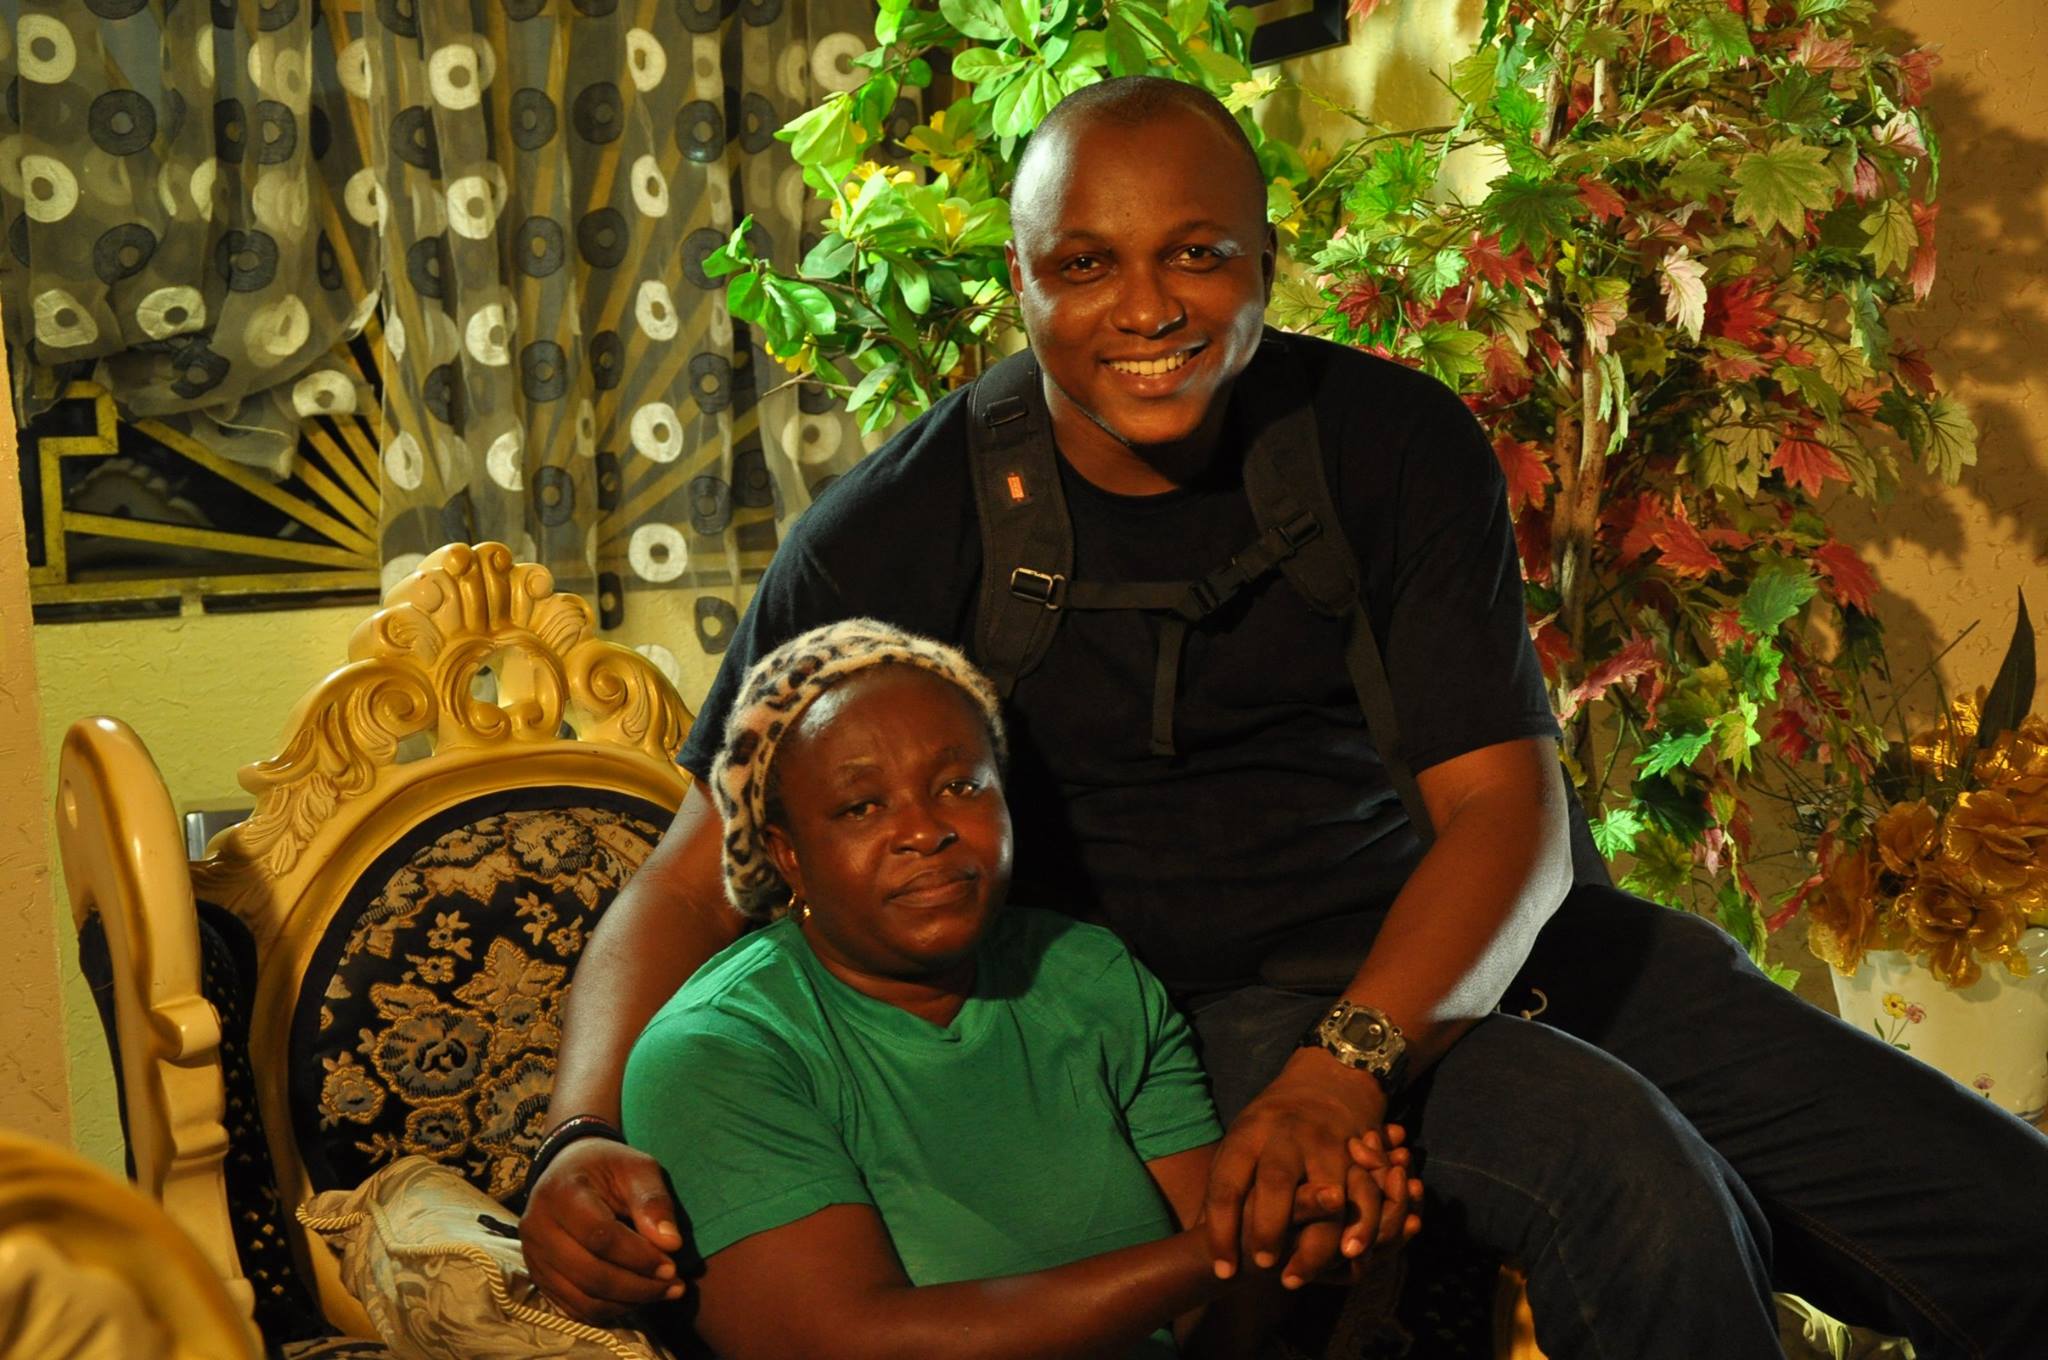 Stanlee Ohikhuare on set shooting a Documentary on Archbishop Benson Andrew Idahosa. Pictured here with Inuwata; who was raised from the dead as a little child - by Benson Idahosa.